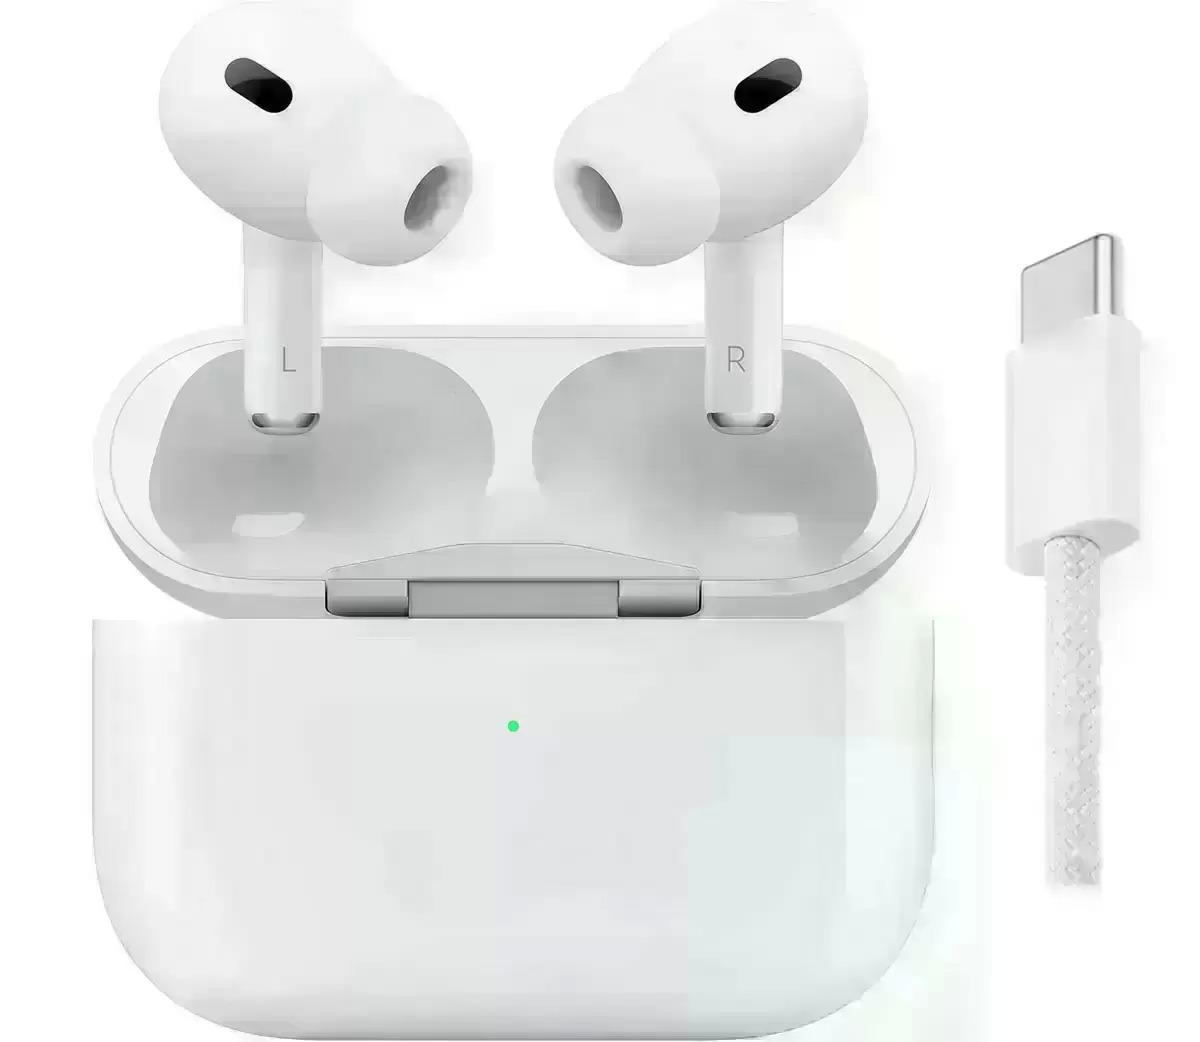 Apple AirPods Pro 2nd Gen with USB-C Case for $189 Shipped